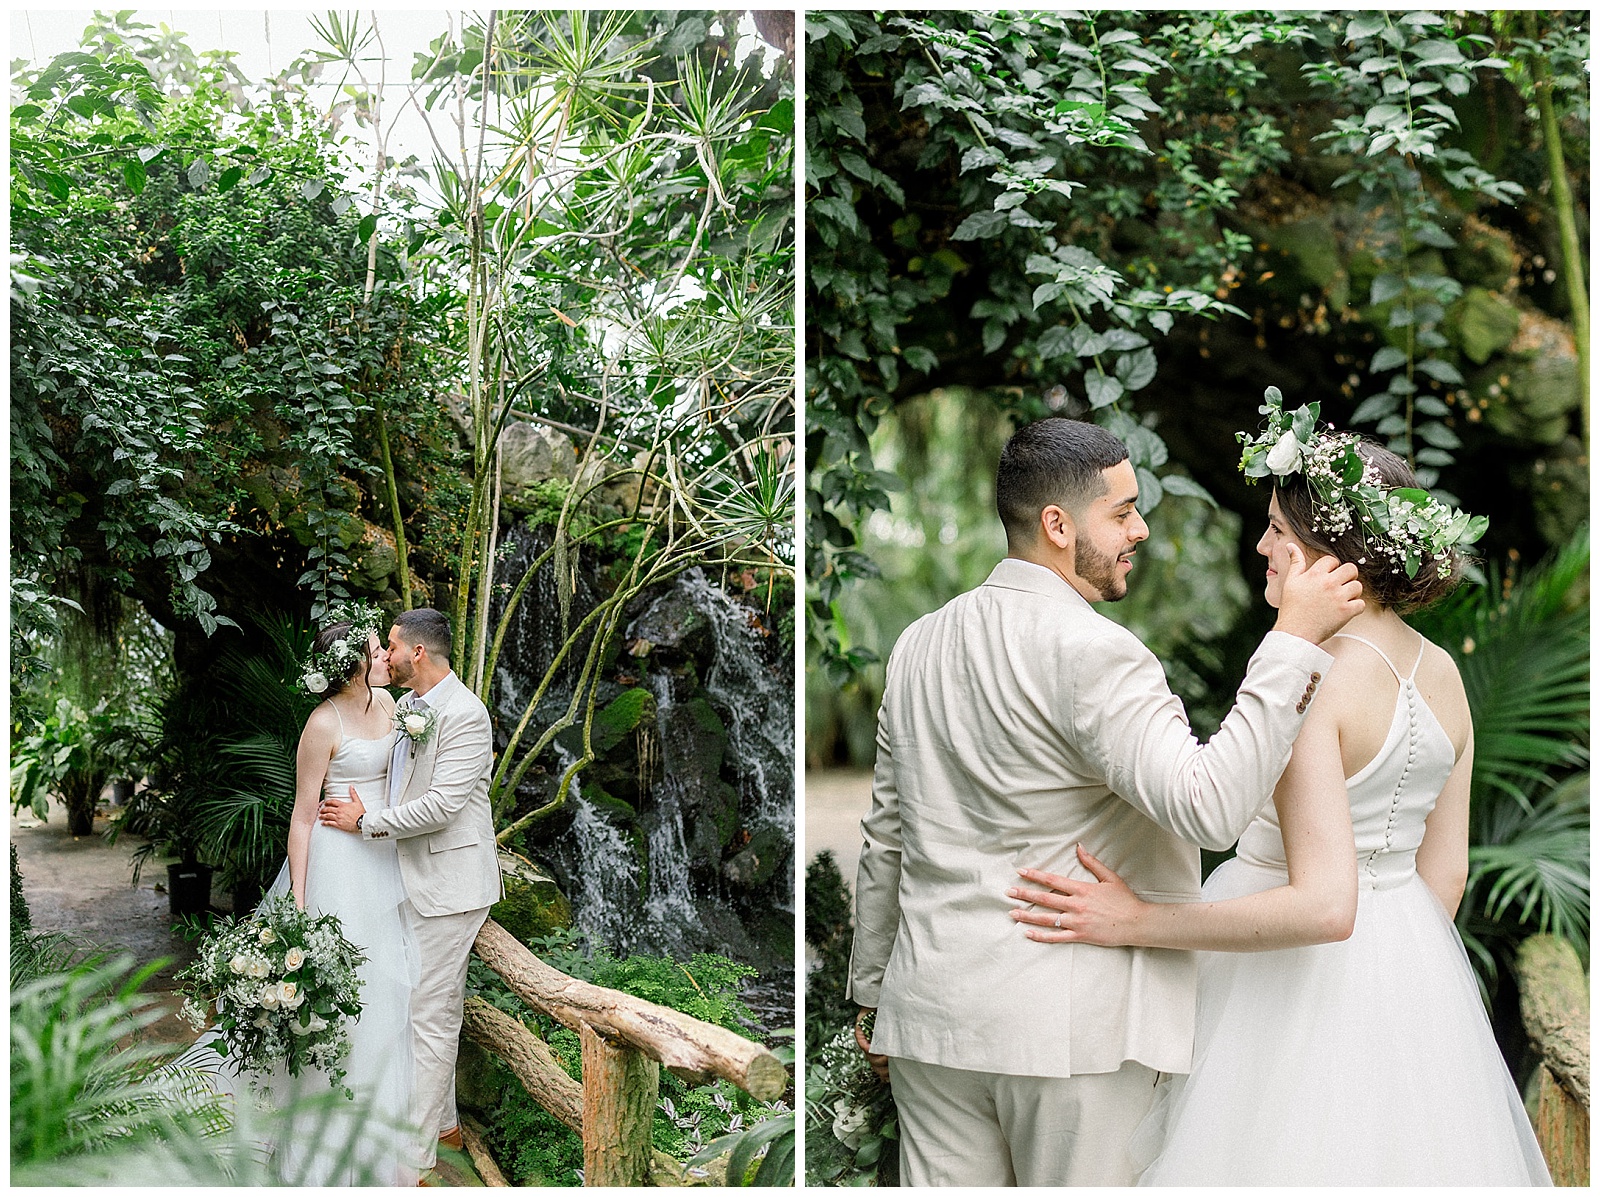 portrait of couple at otts exotic plants greenhouse in pa on their wedding day in boho wedding attire and floral crown, right before their intimate home DIY wedding ceremony